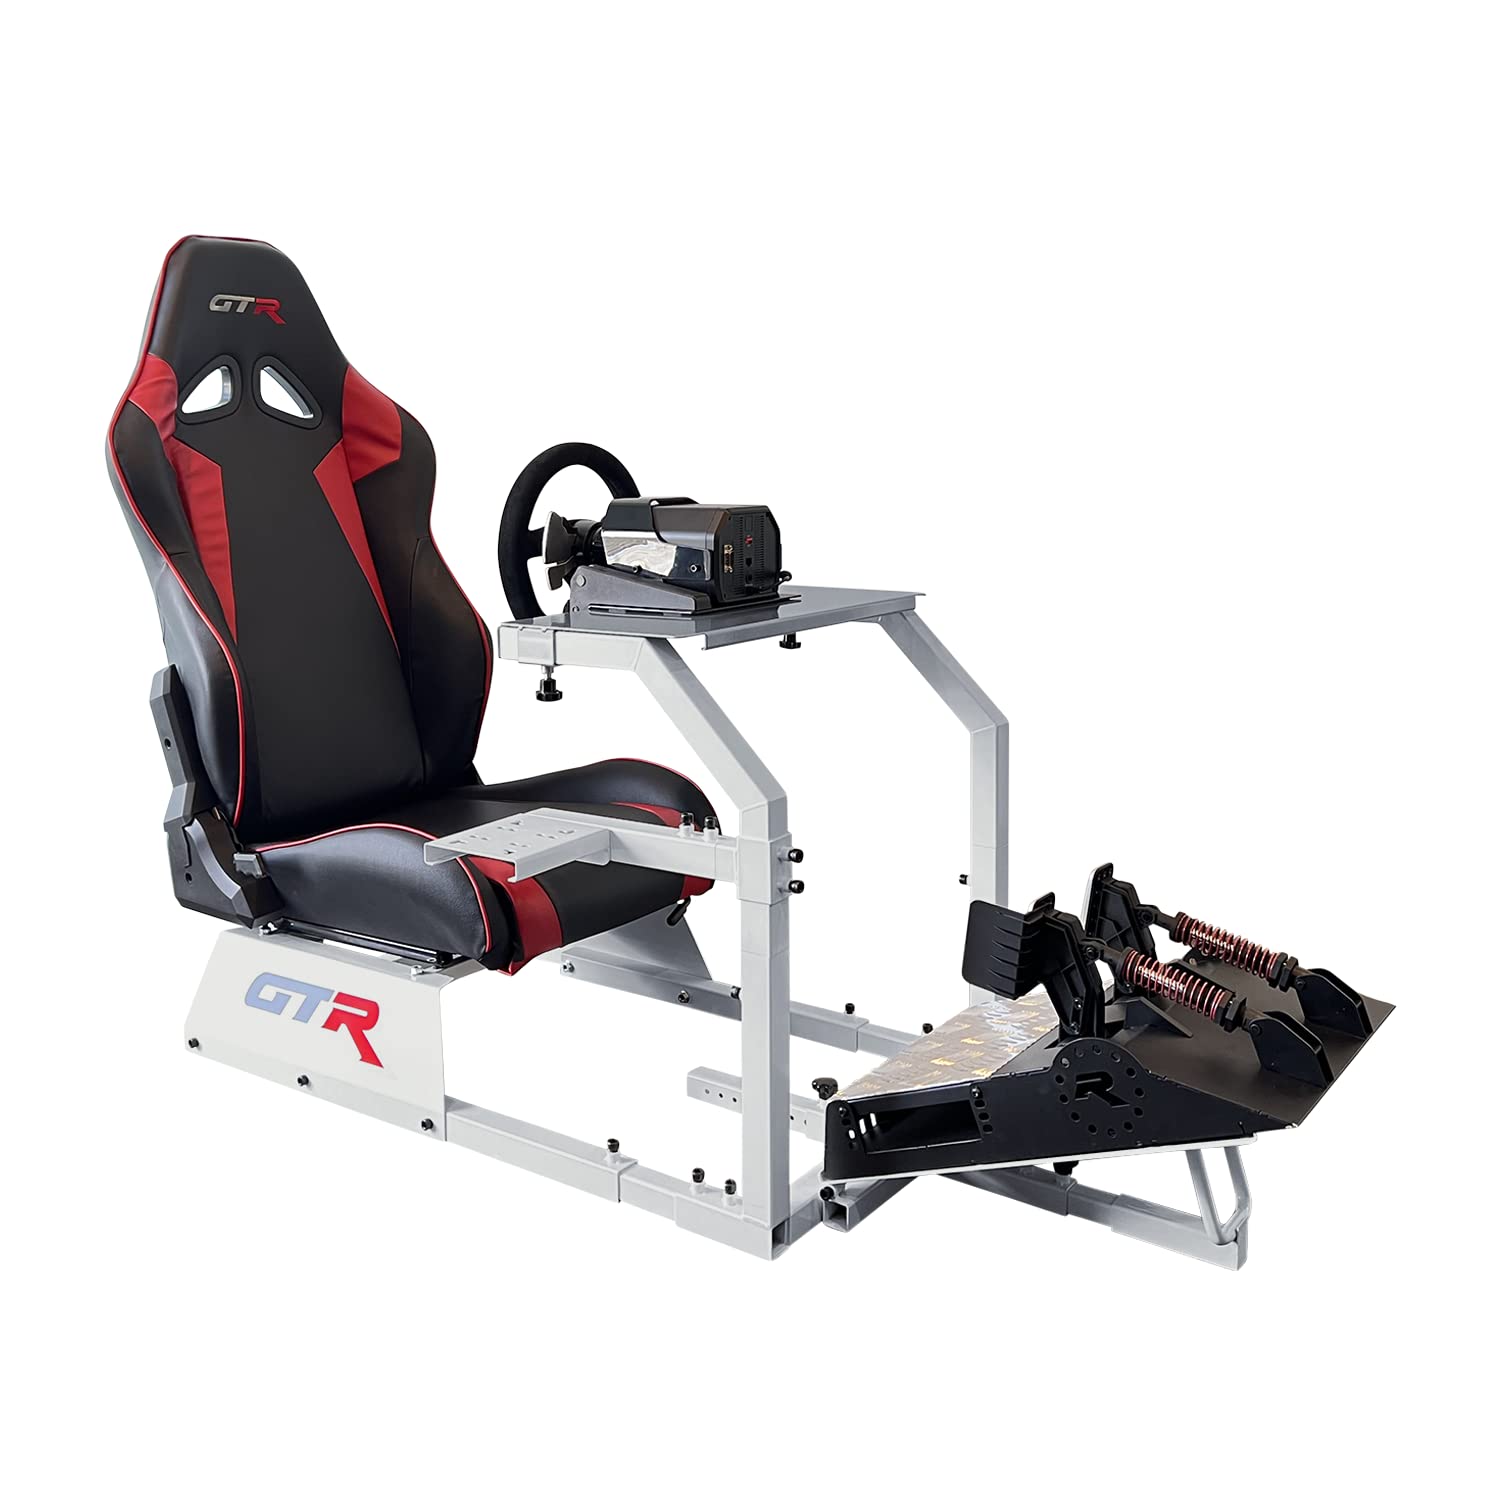 Racing Simulation Build Consultation Services - Alliance HPDE Academy